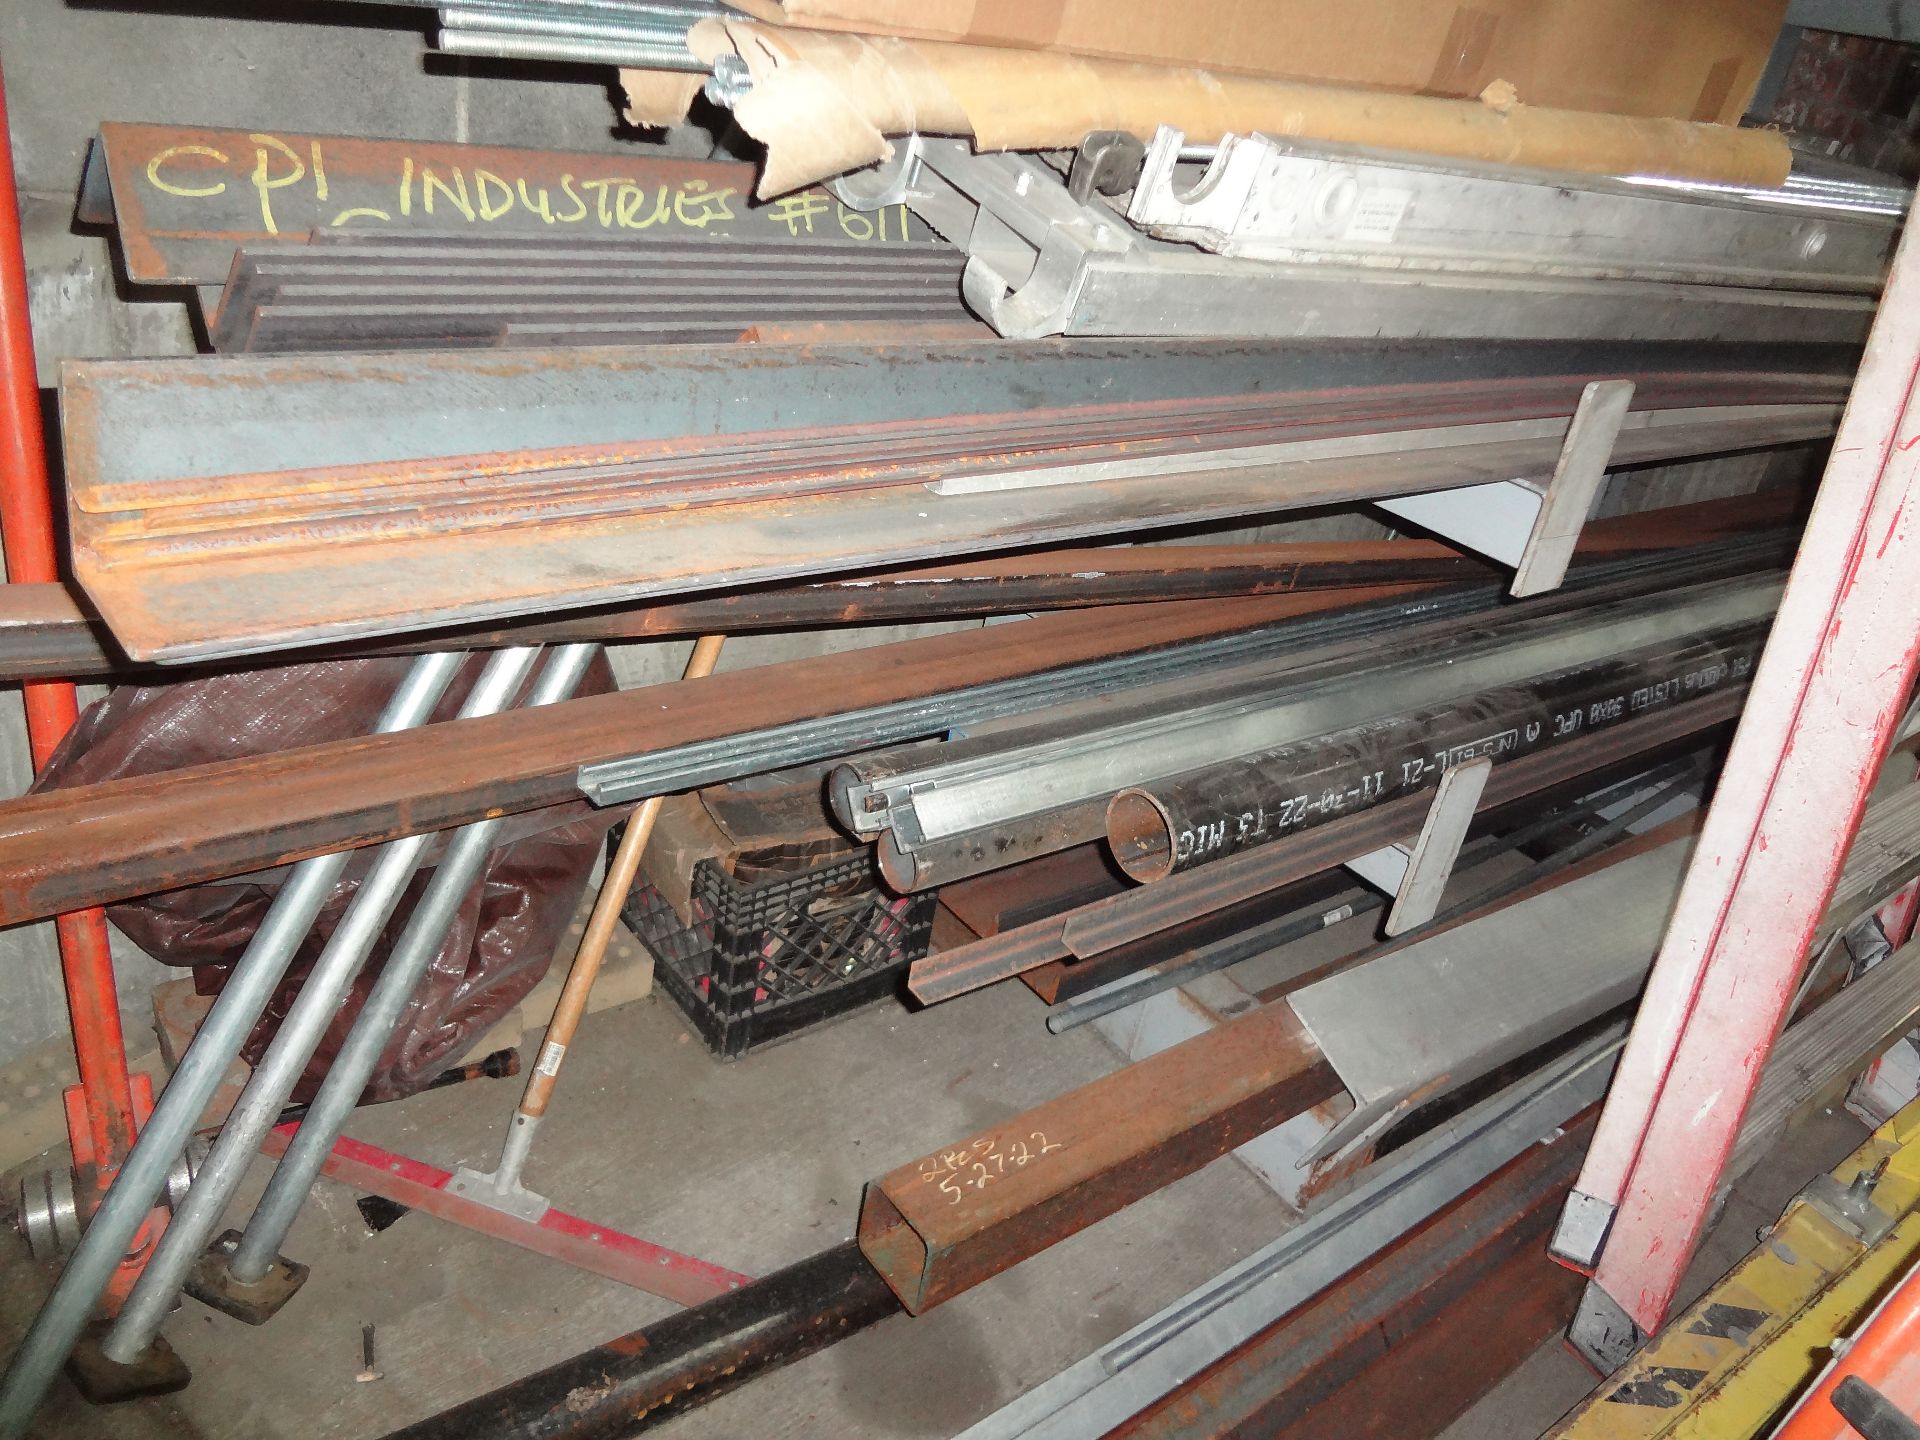 ASSORTED ANGLE IRON, COPPER TUBE, CONDUIT, SQUARE TUBING, FLATS, THREADED ROD, ETC. (AGAINST WALL IN - Image 2 of 5